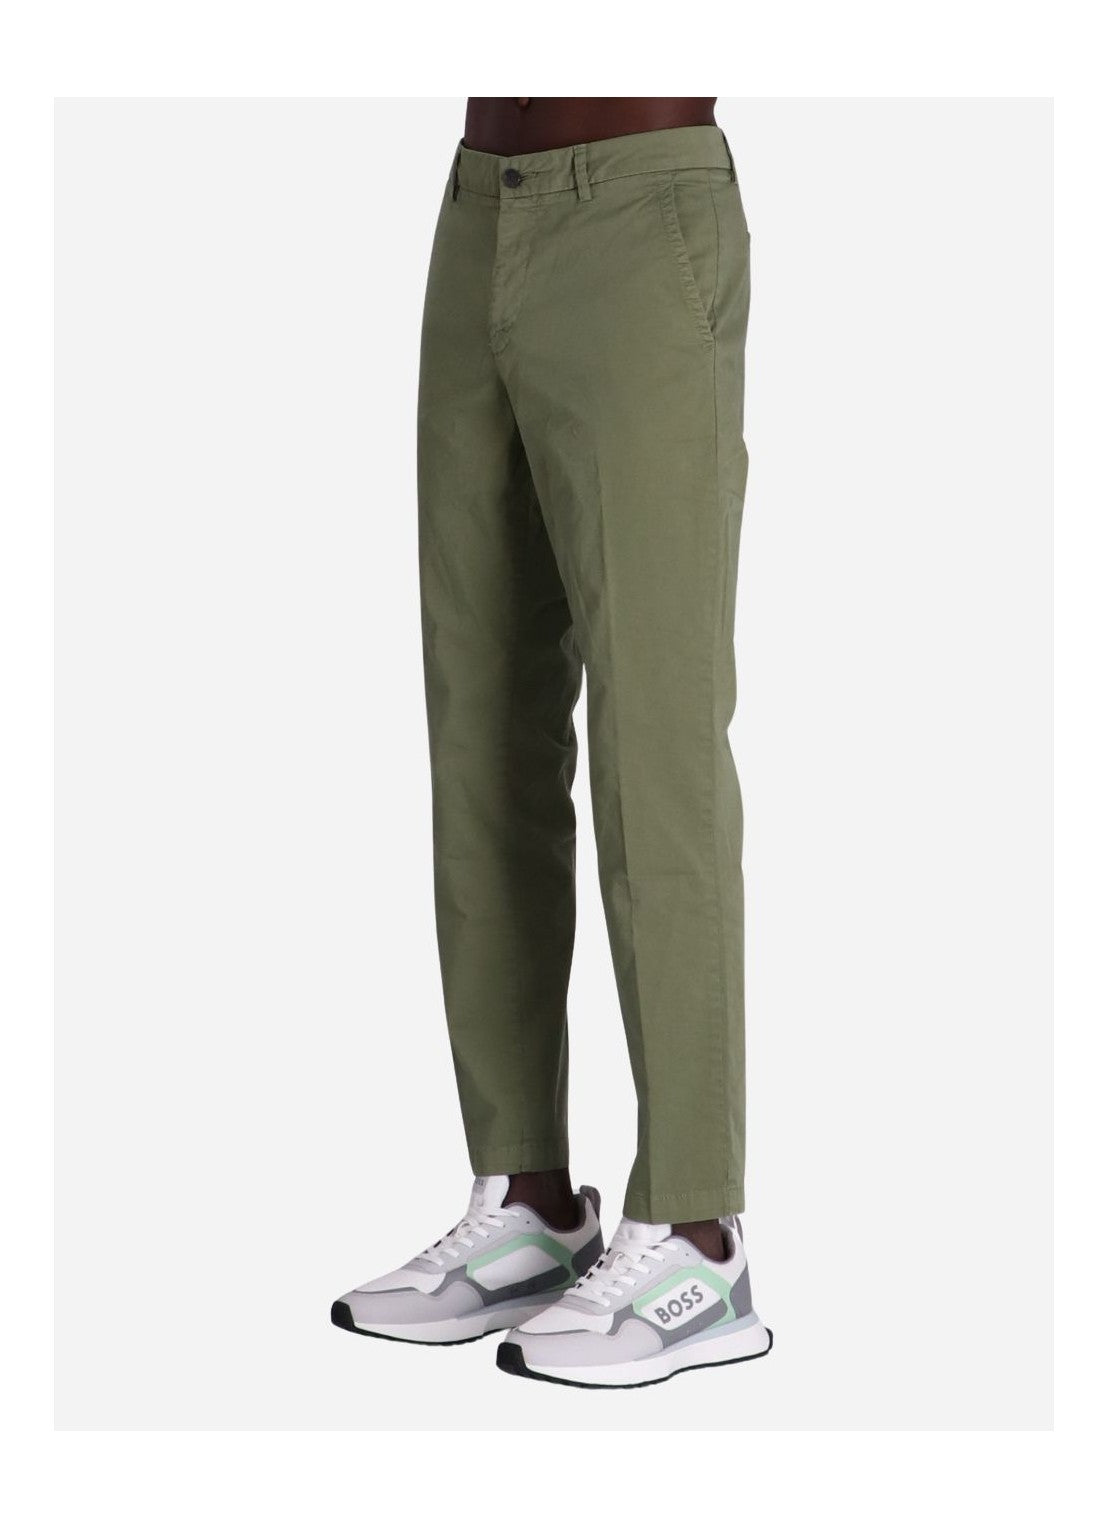 BOSS - KAITON Slim Fit Chinos In Stretch Cotton In Open Green 50505392 374